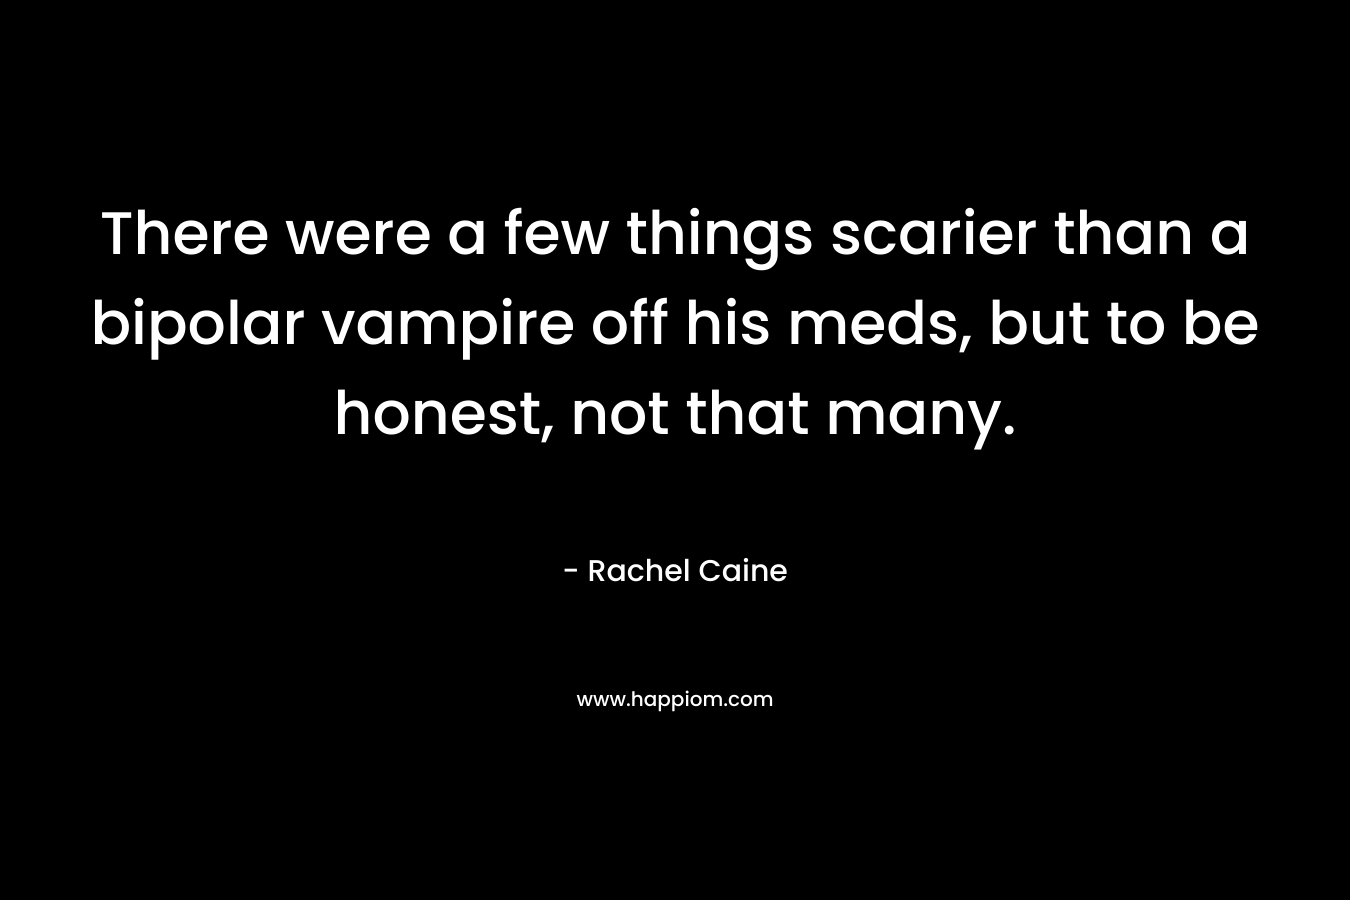 There were a few things scarier than a bipolar vampire off his meds, but to be honest, not that many. – Rachel Caine